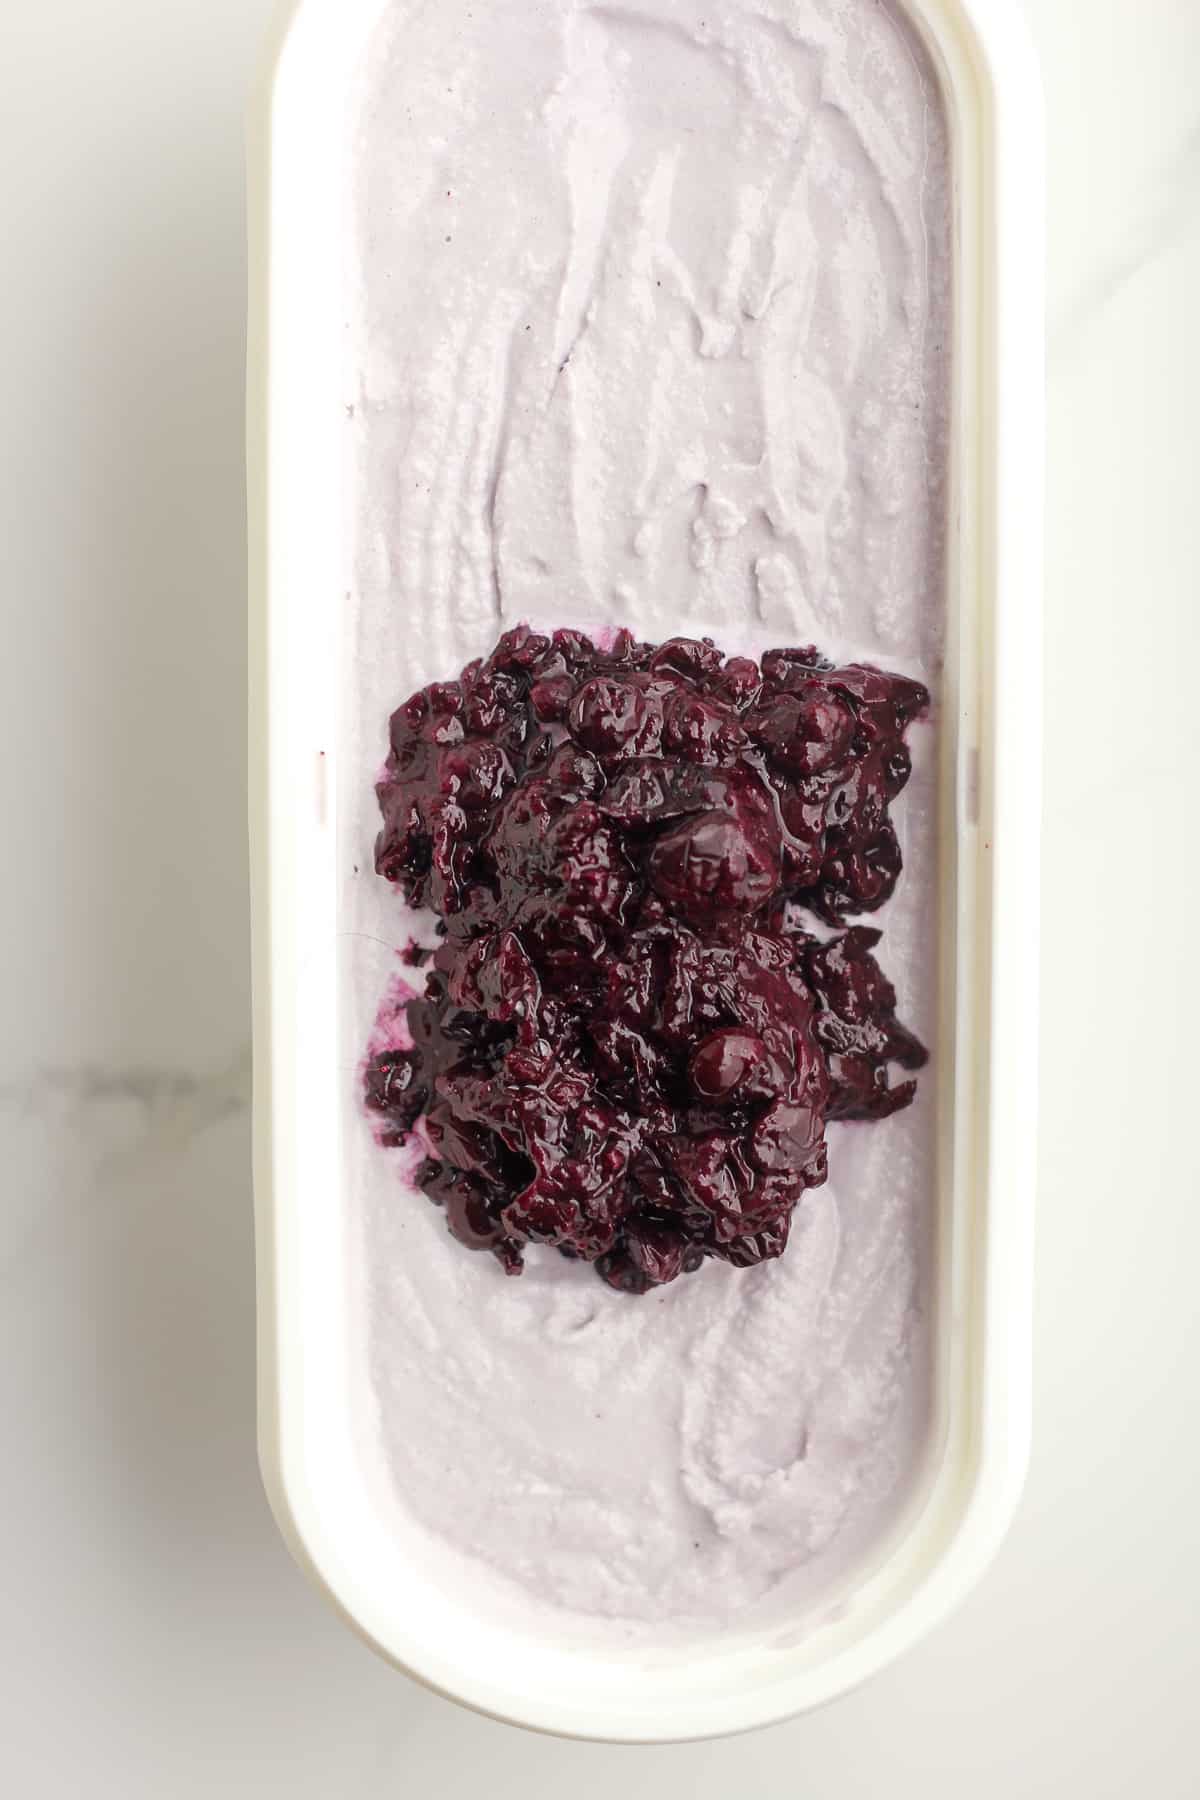 The cooked blueberries on the blueberry ice cream in container.